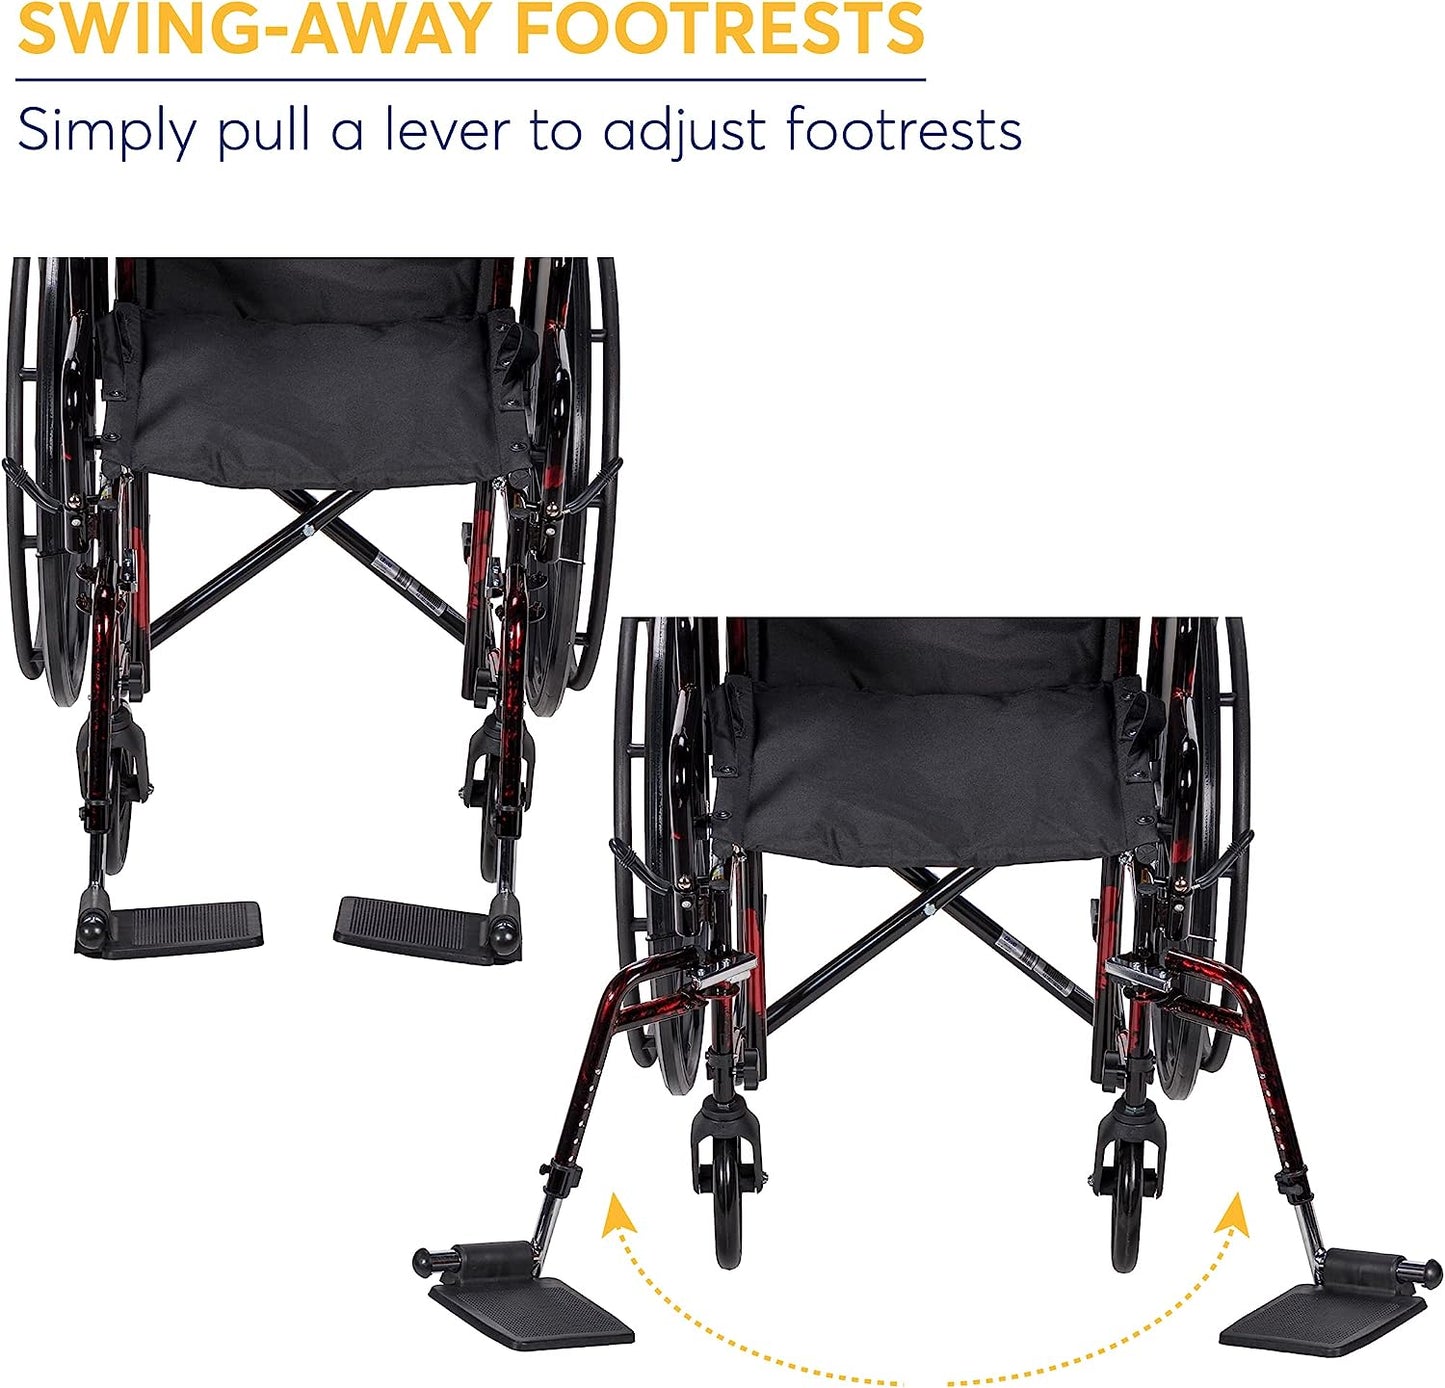 NEW - Drive Medical RTLREB18DDA-SF Rebel Lightweight Wheelchair with Swing-Away Footrest, Red - Retail $155